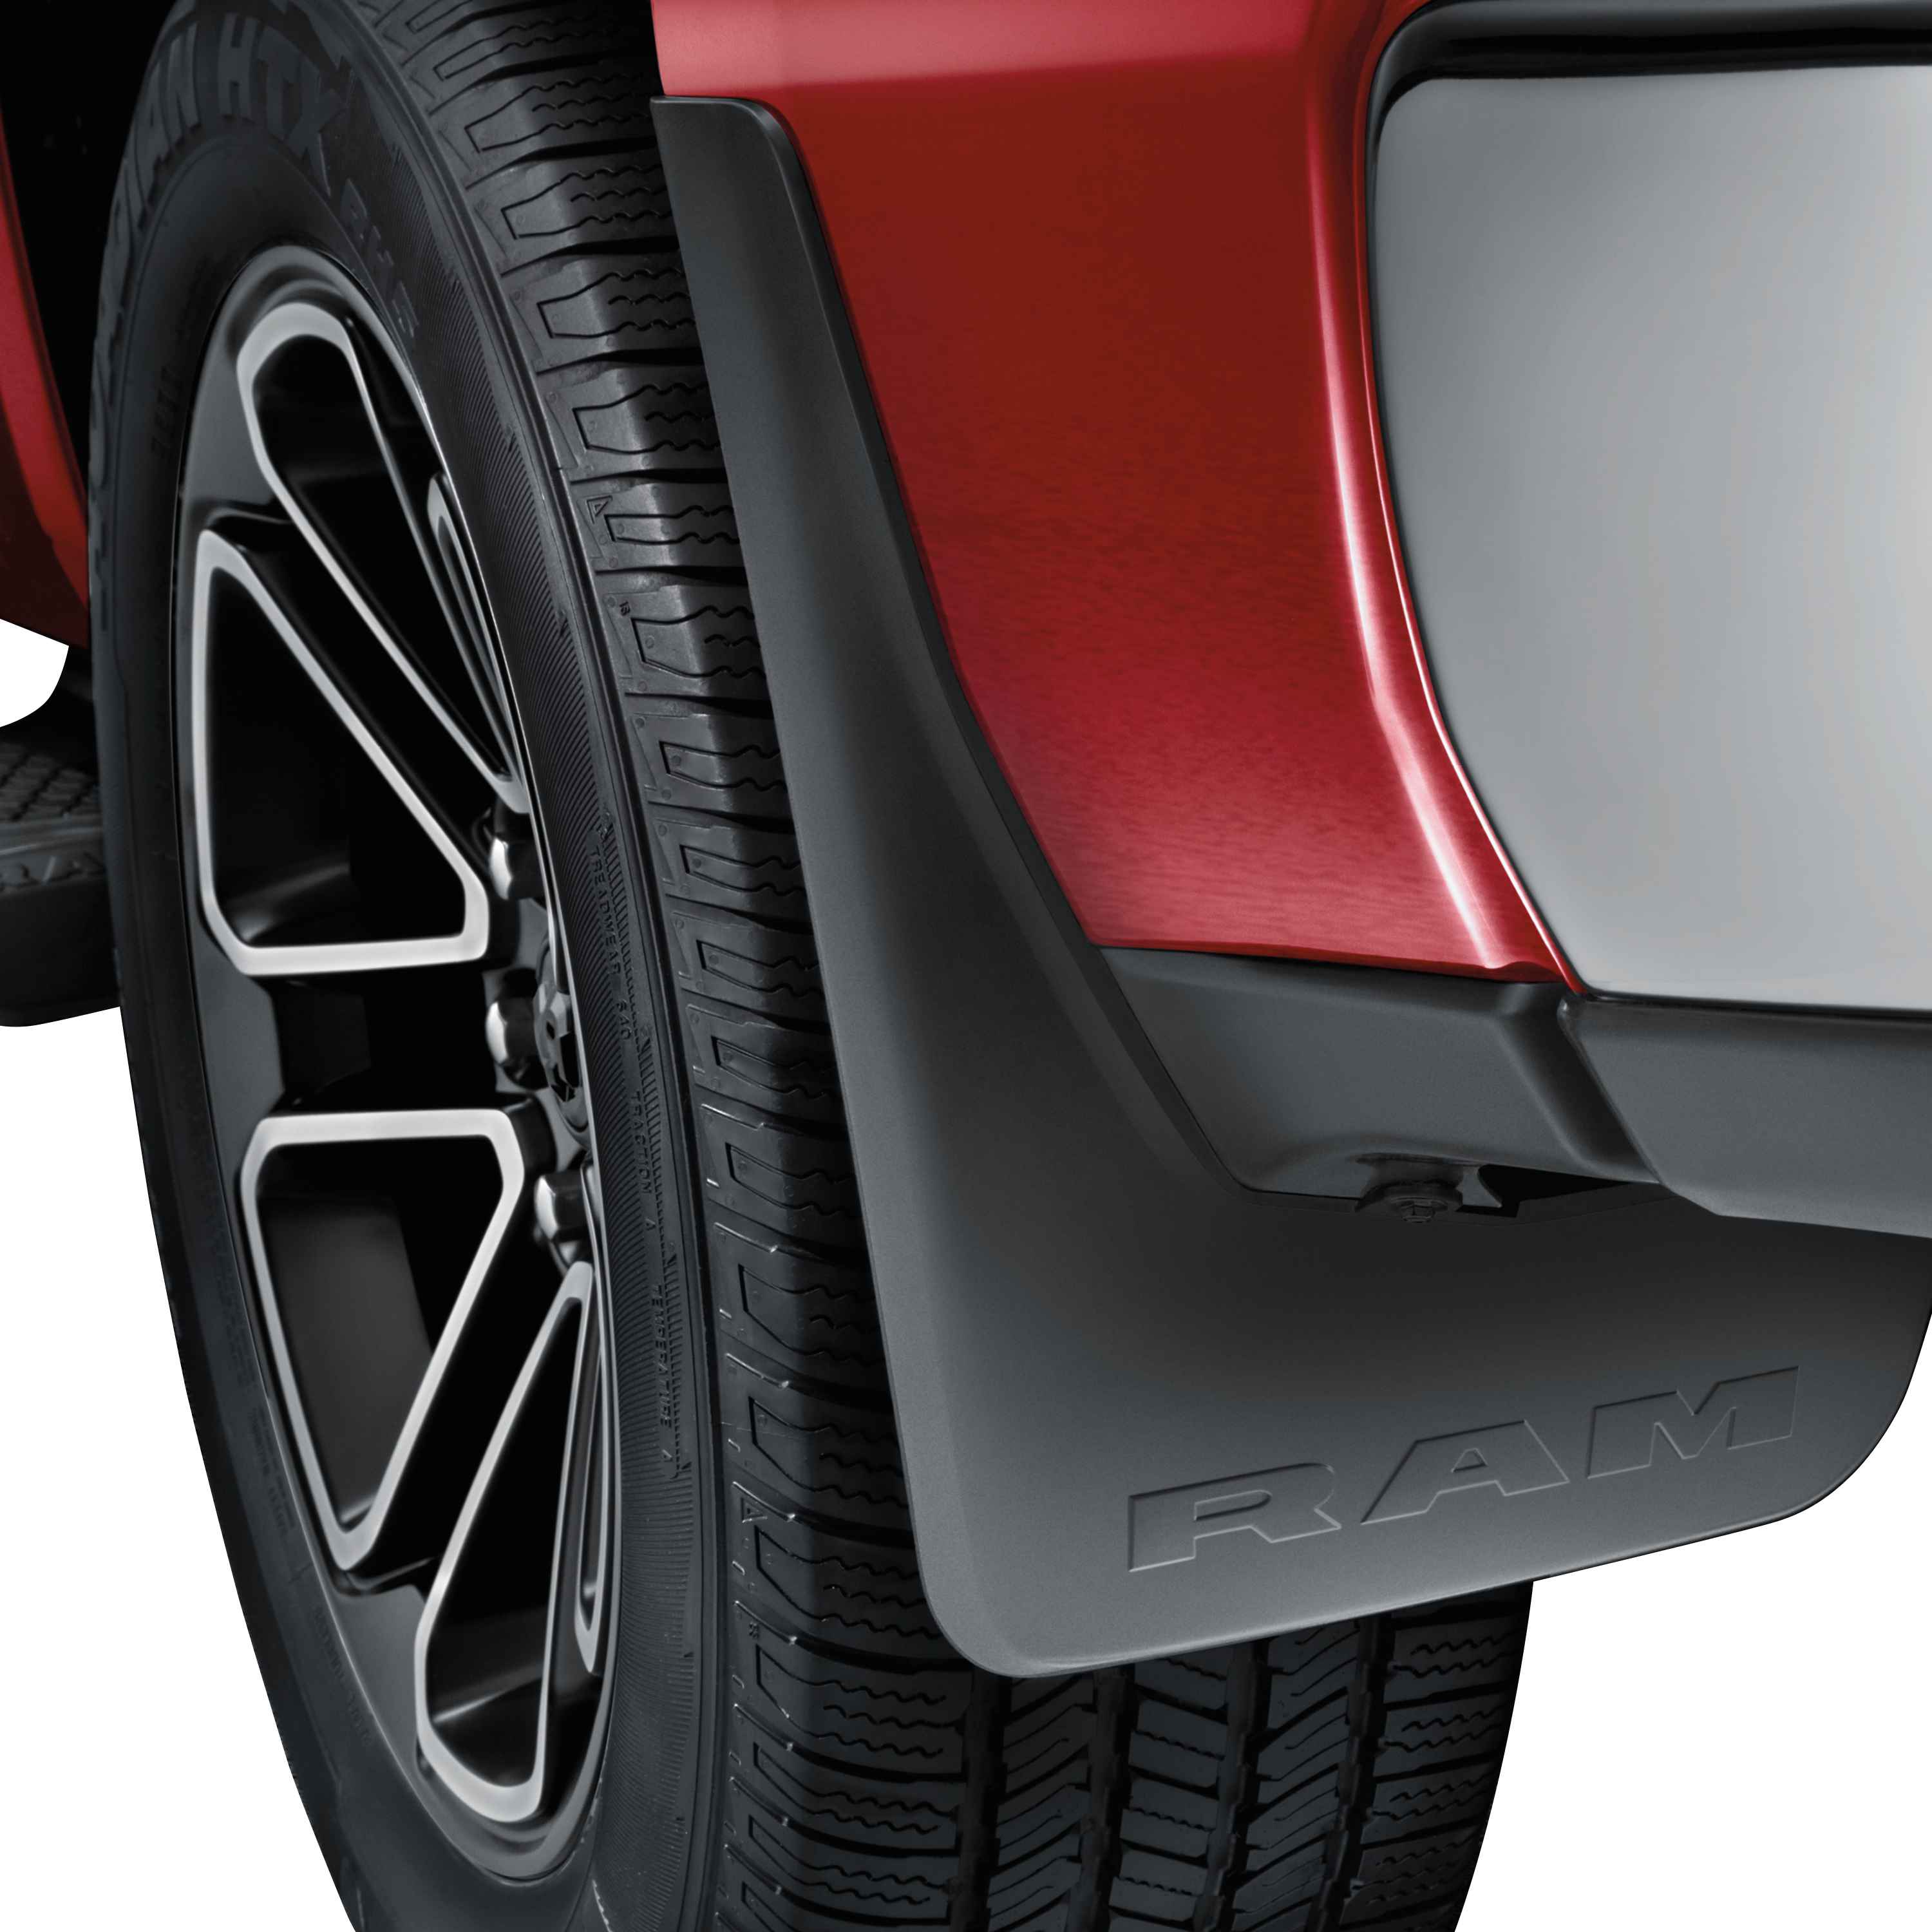 OEM 2019 Ram 1500 Splash Guards, Heavy-Duty Rubber Rear for Vehicles with production Fender Flares (Part #82216216AA)